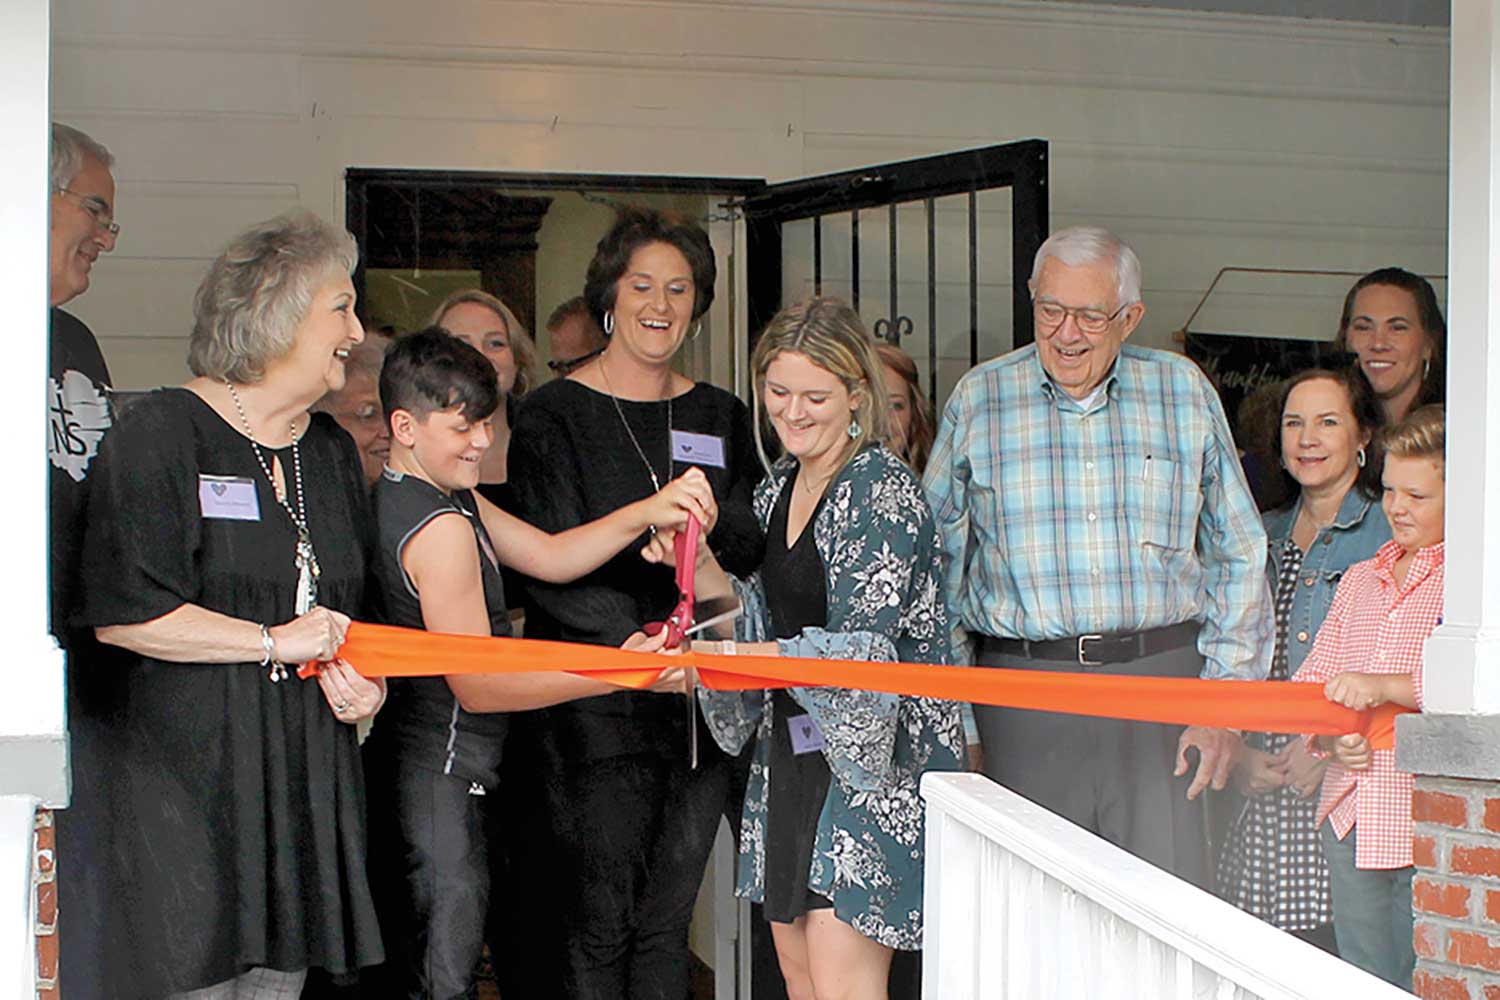 Jessica Williams (center) joined by family and friends cuts the ribbon marking the opening of Hope House, a residential Christian Restoration & Transformation Program for women recovering from drug addiction. (MNJ photos/ Rachel Hoskins)  